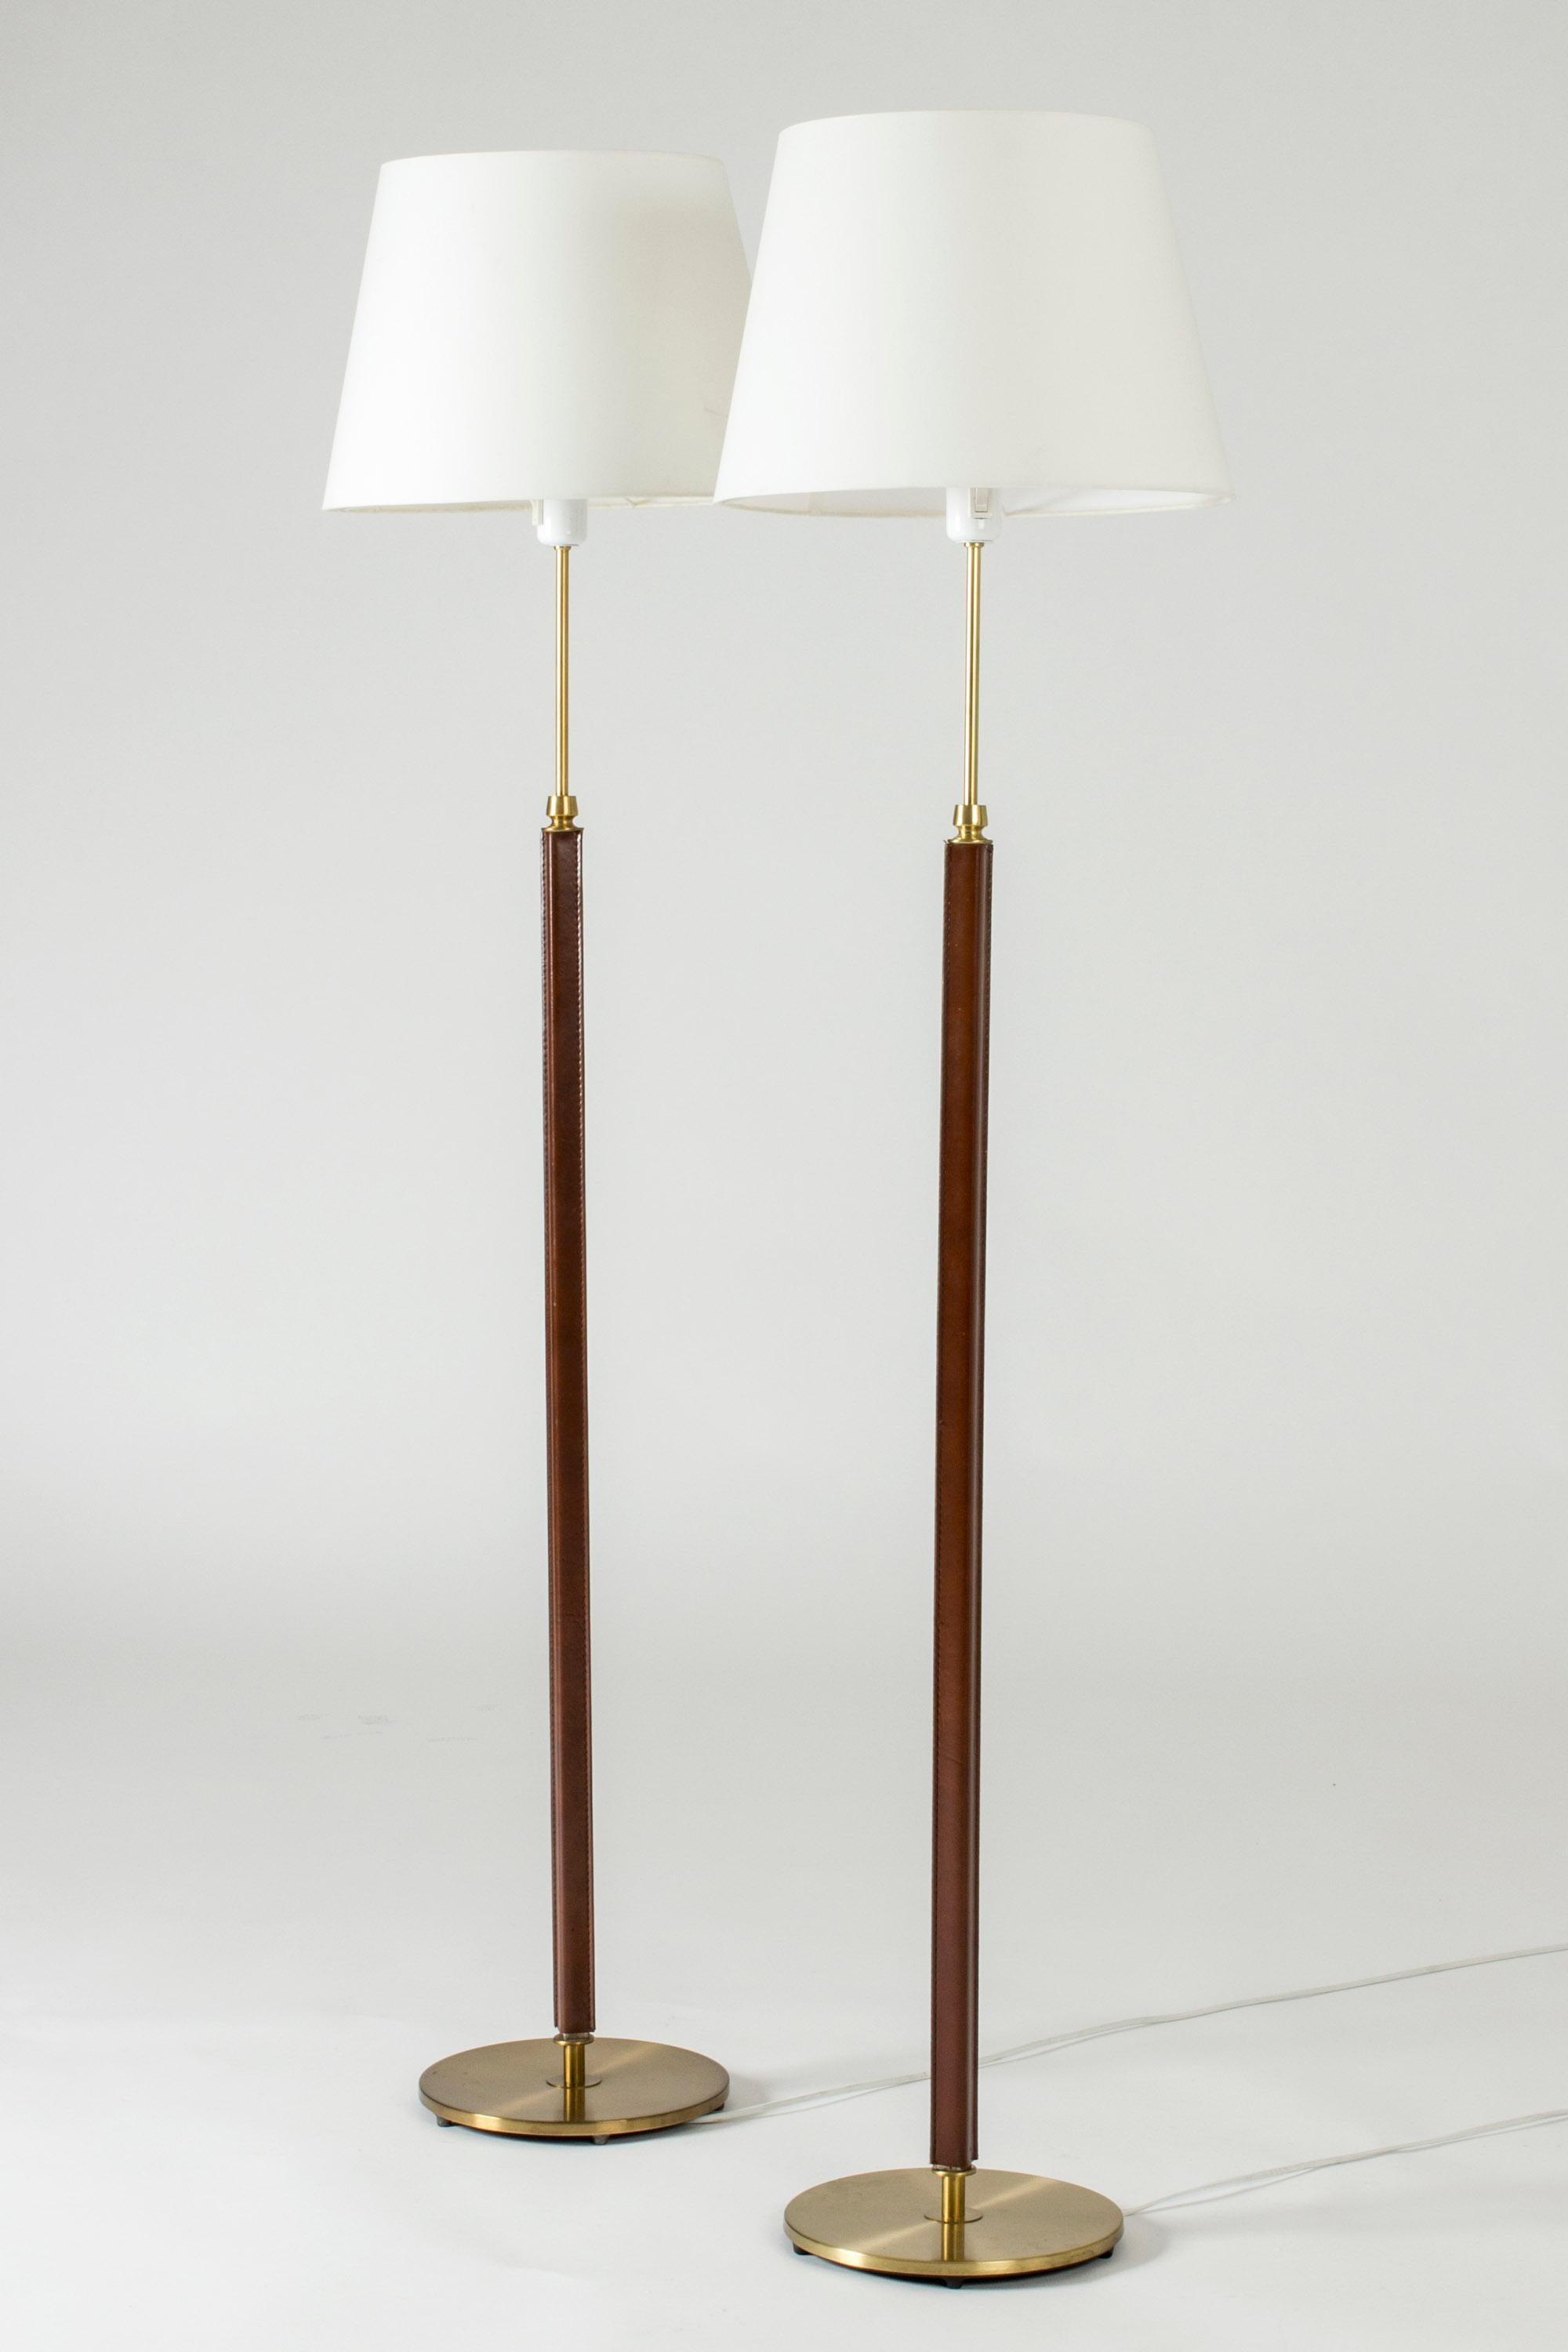 Pair of cool floor lamps from Falkenbergs Belysning, made from brass. Sleek square stems dressed with brown leather.